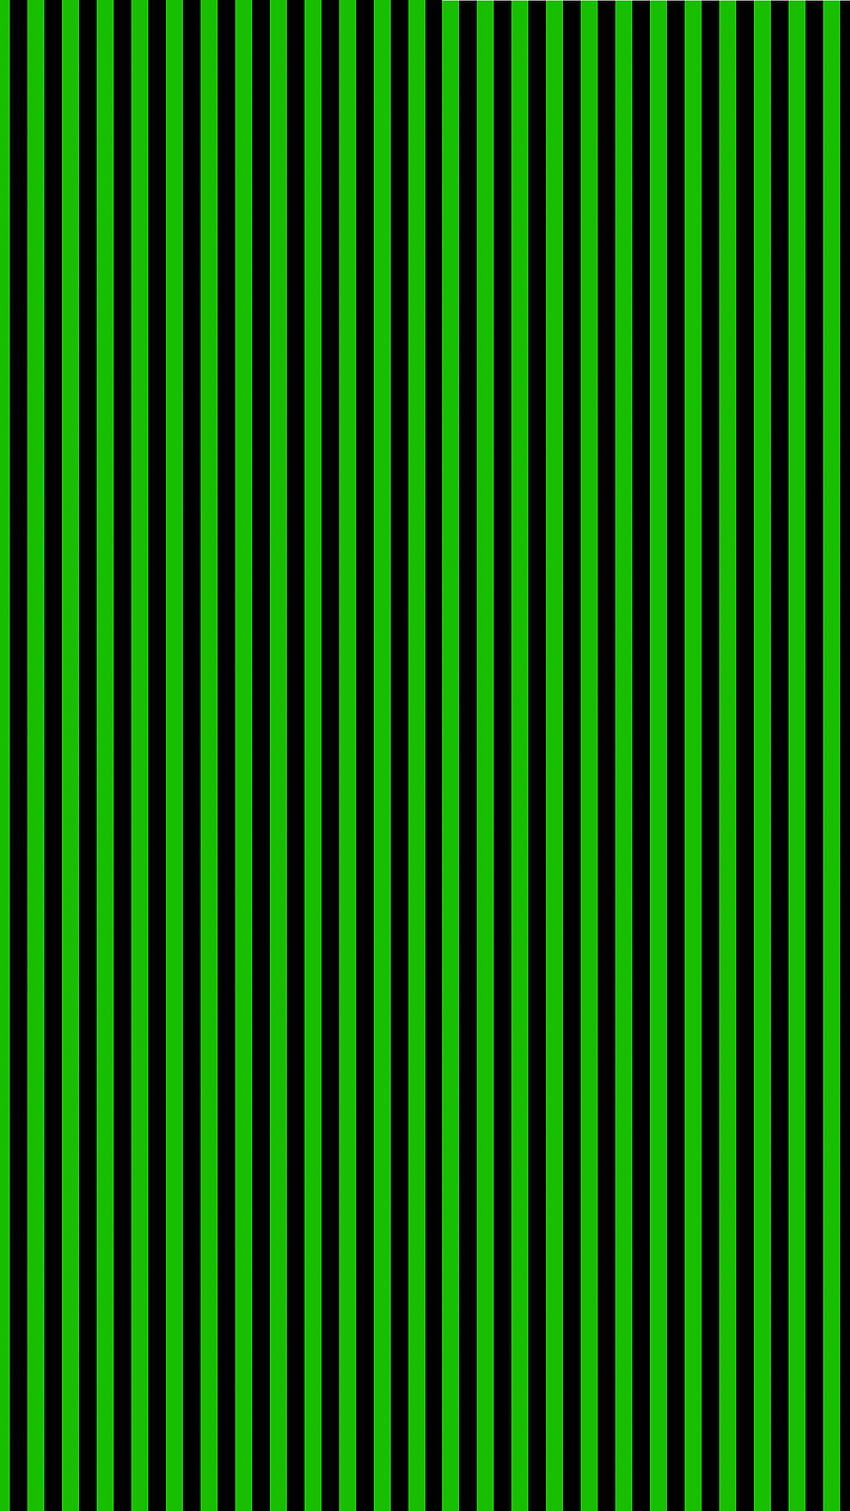 Green Stripes Wallpaper Images Browse 670240 Stock Photos  Vectors Free  Download with Trial  Shutterstock